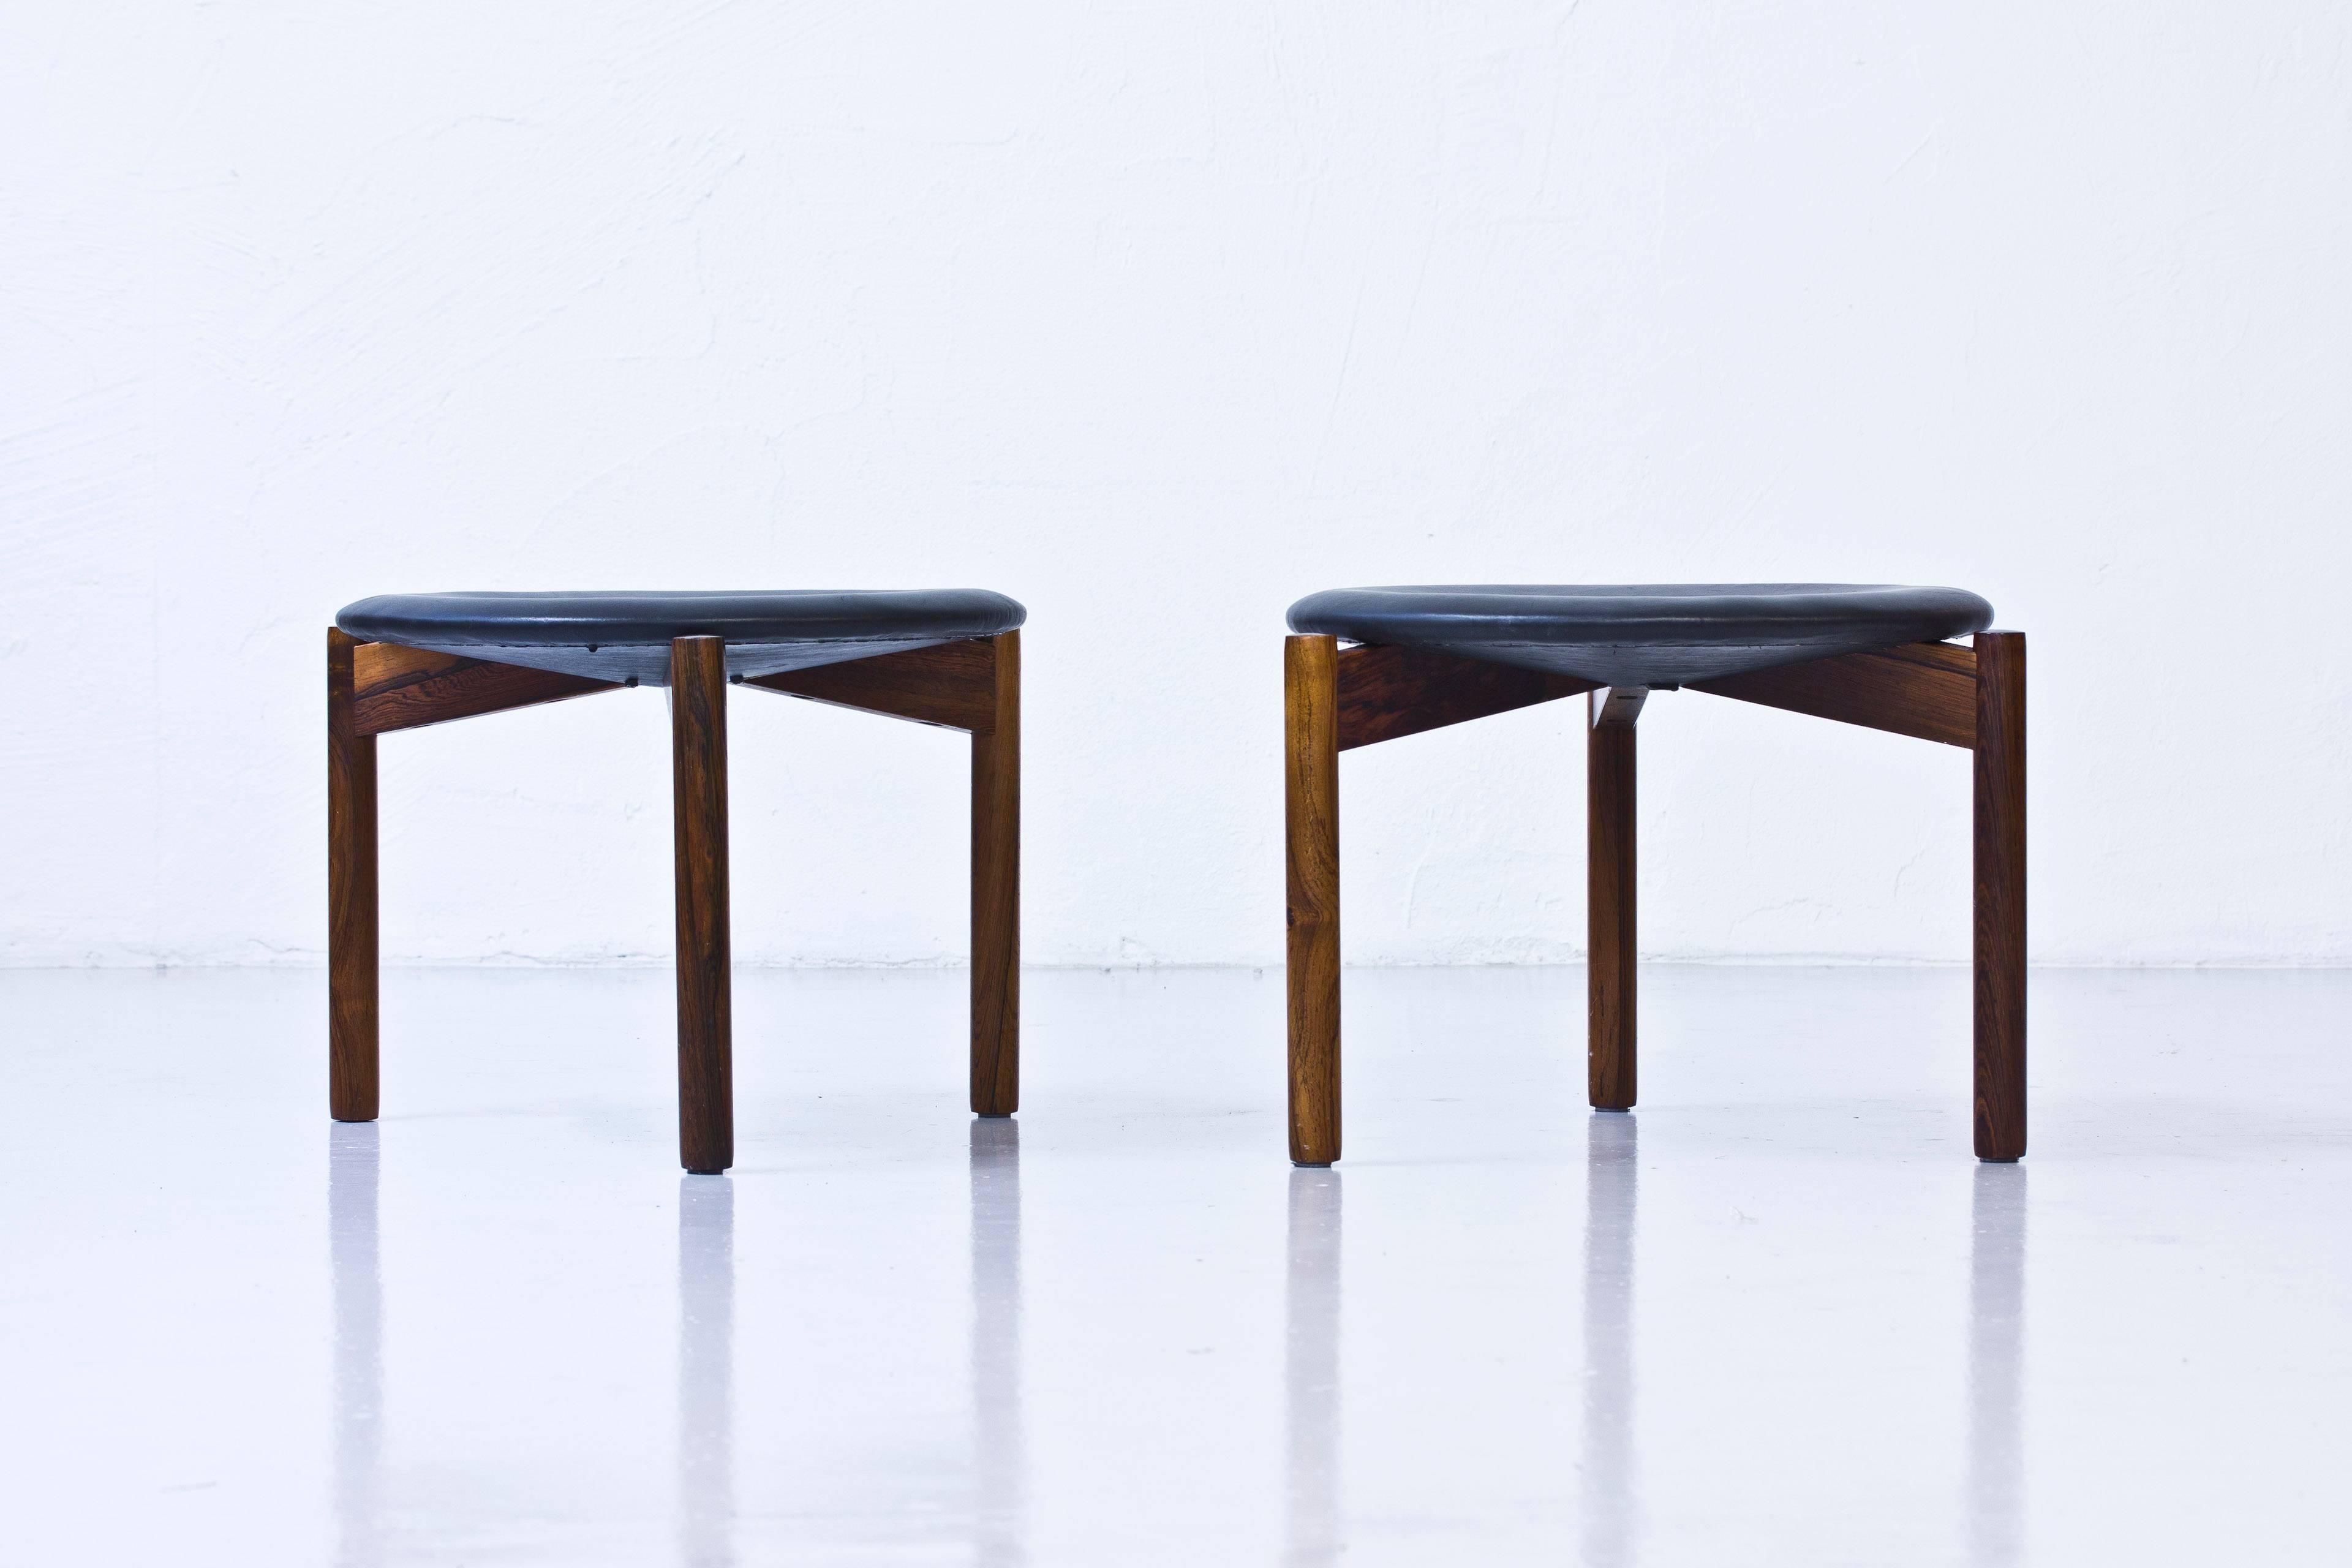 Very rare pair of stools deigned by Uno and Osten Kristiansson. Produced by Luxus in Vittsjo, Sweden during the 1960s. Made from solid palisander wood. Recently reupholstered with new padding and black leather. Excellent condition with very few